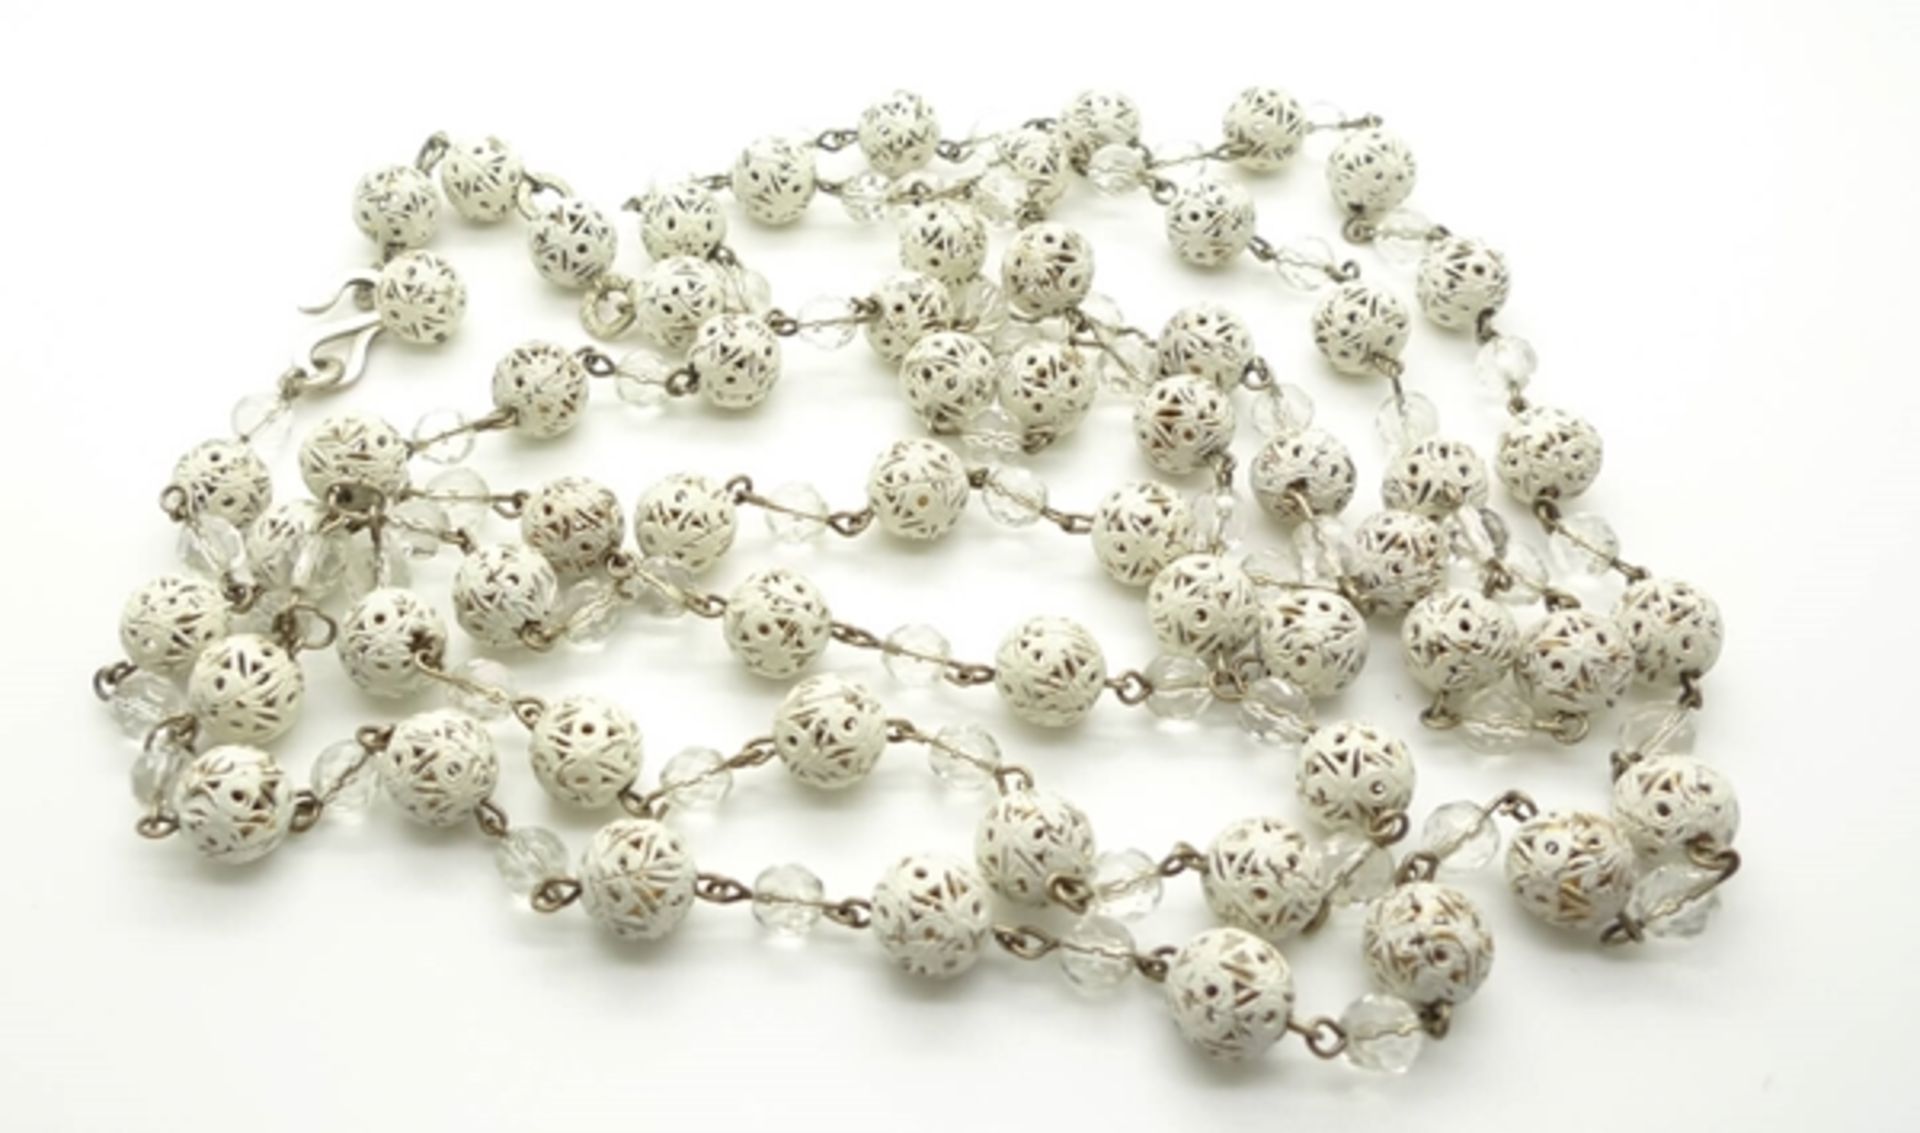 Mitchel Maer for Christian Dior Five Strand Gold White Filigree Necklace 1950s - Image 3 of 5